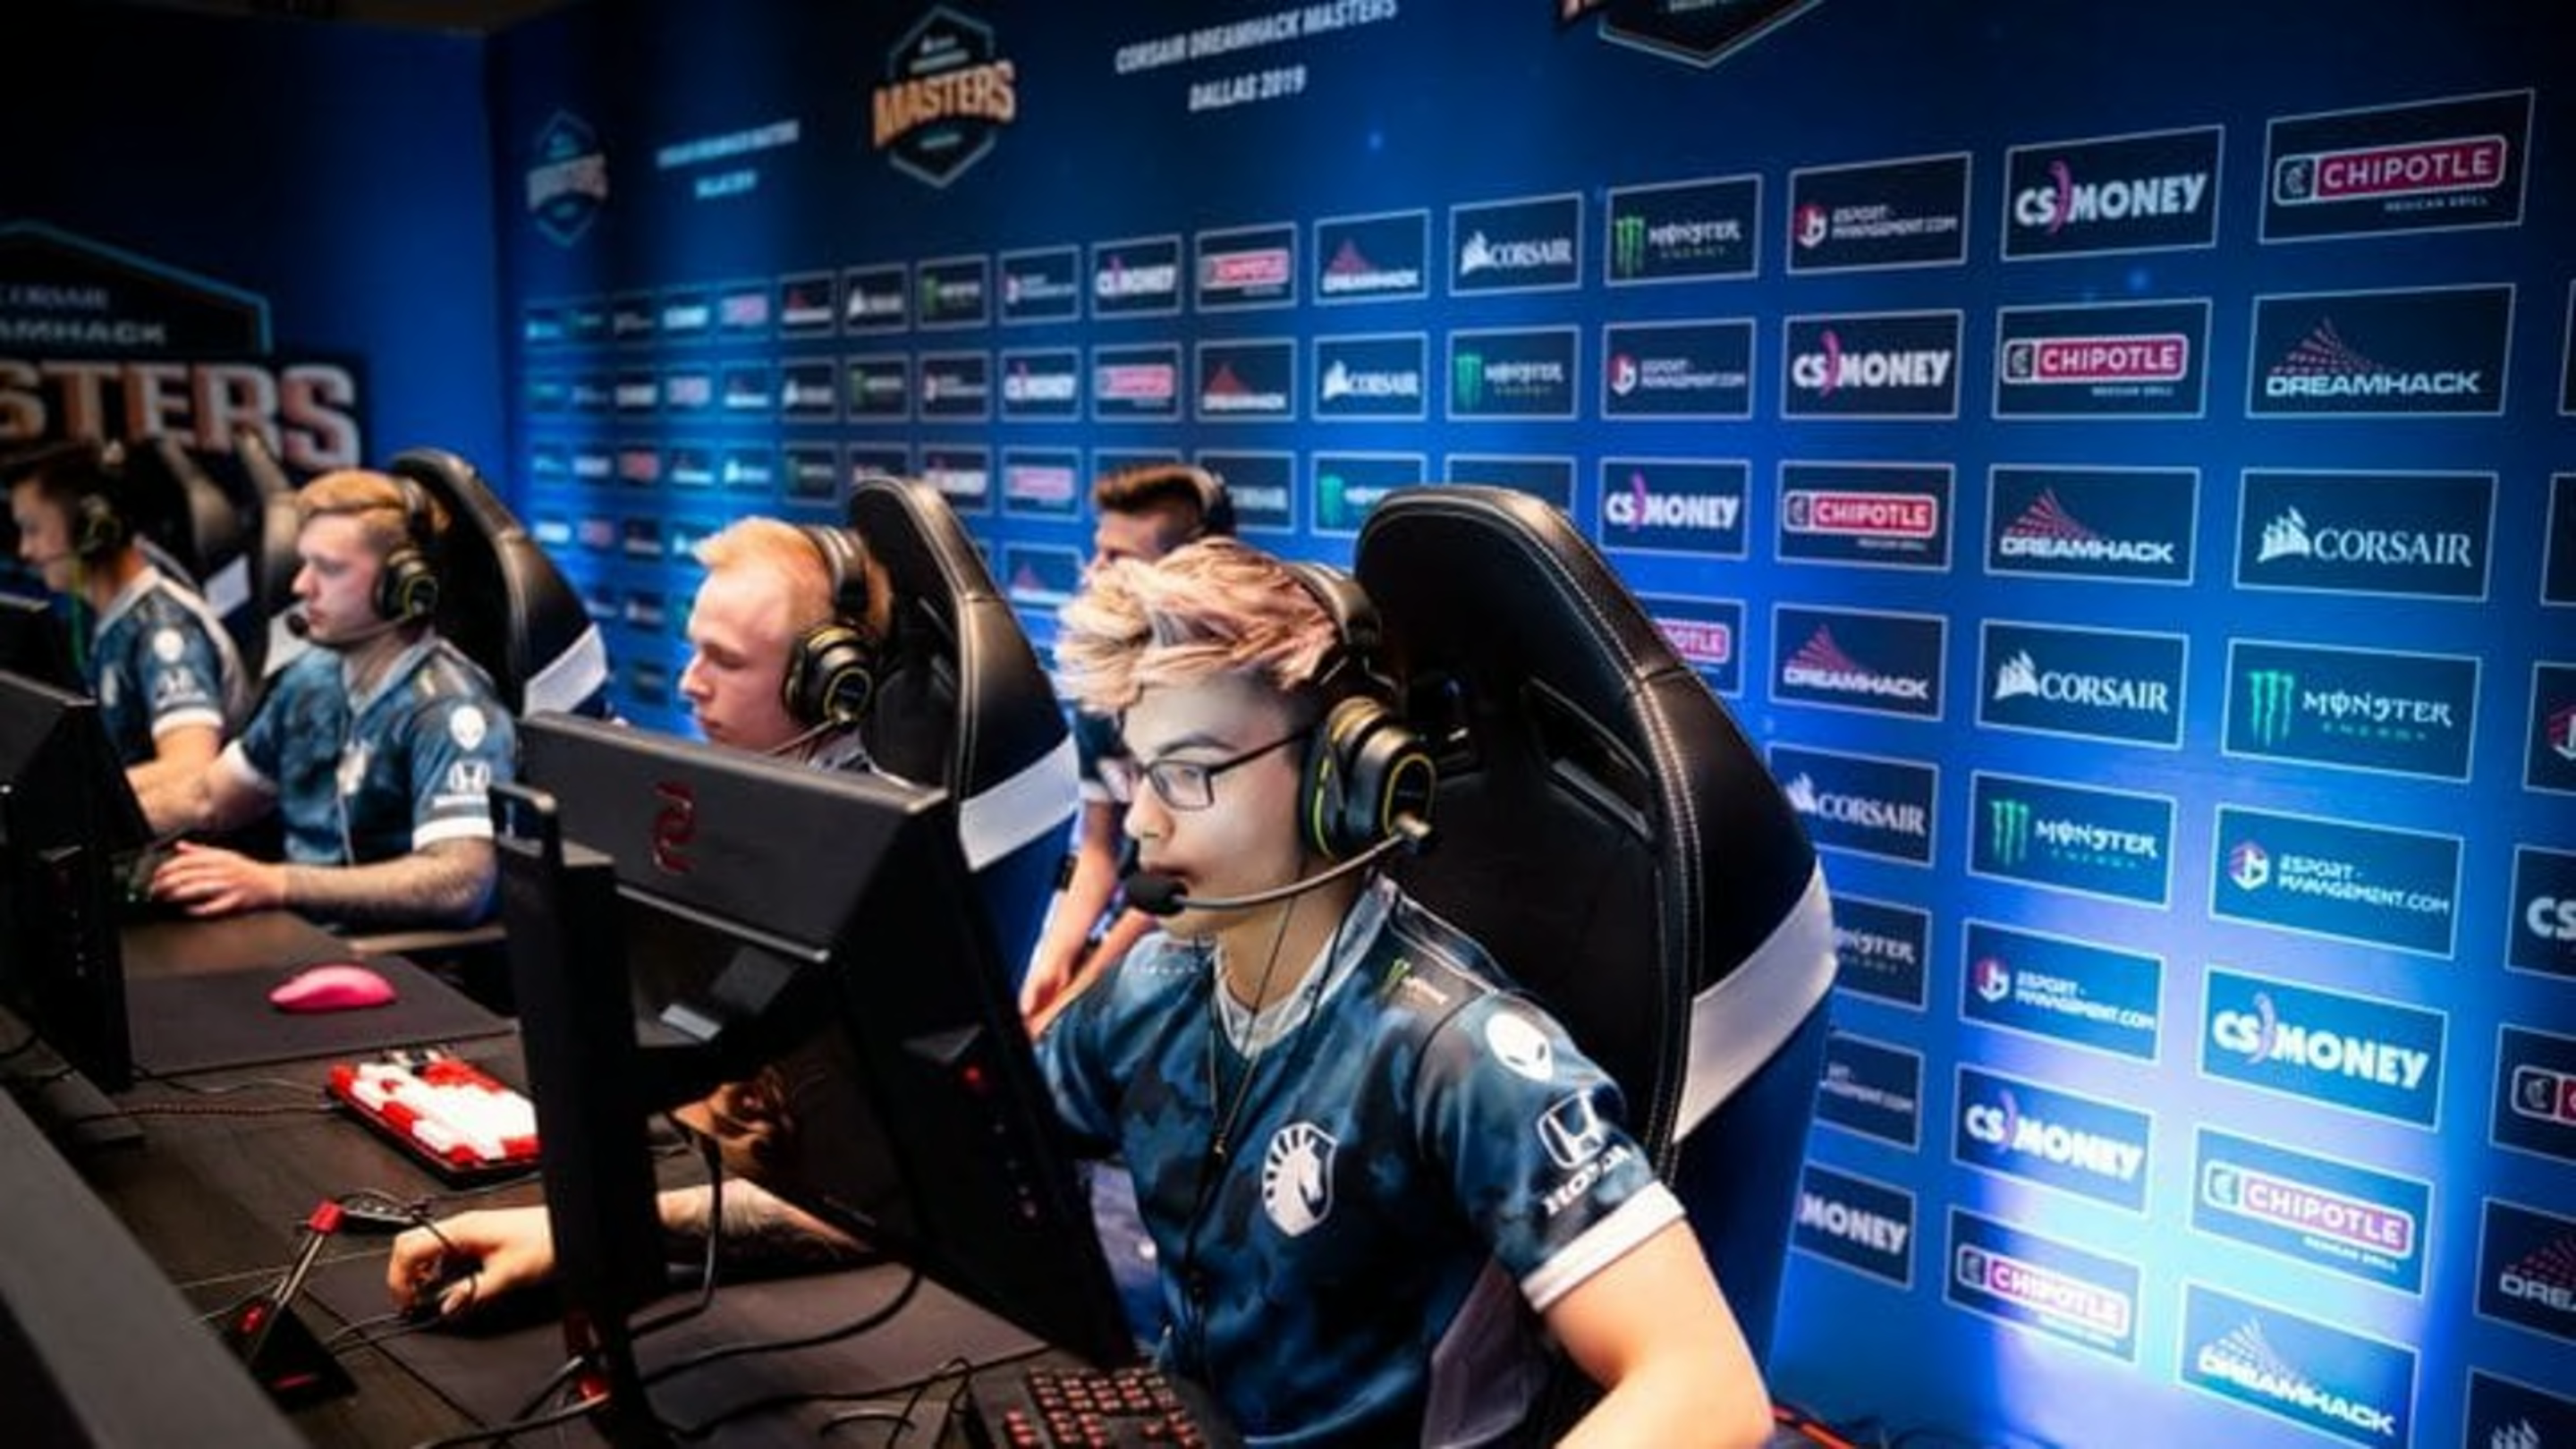 Sources: Twistzz in Discussions with FaZe Clan.